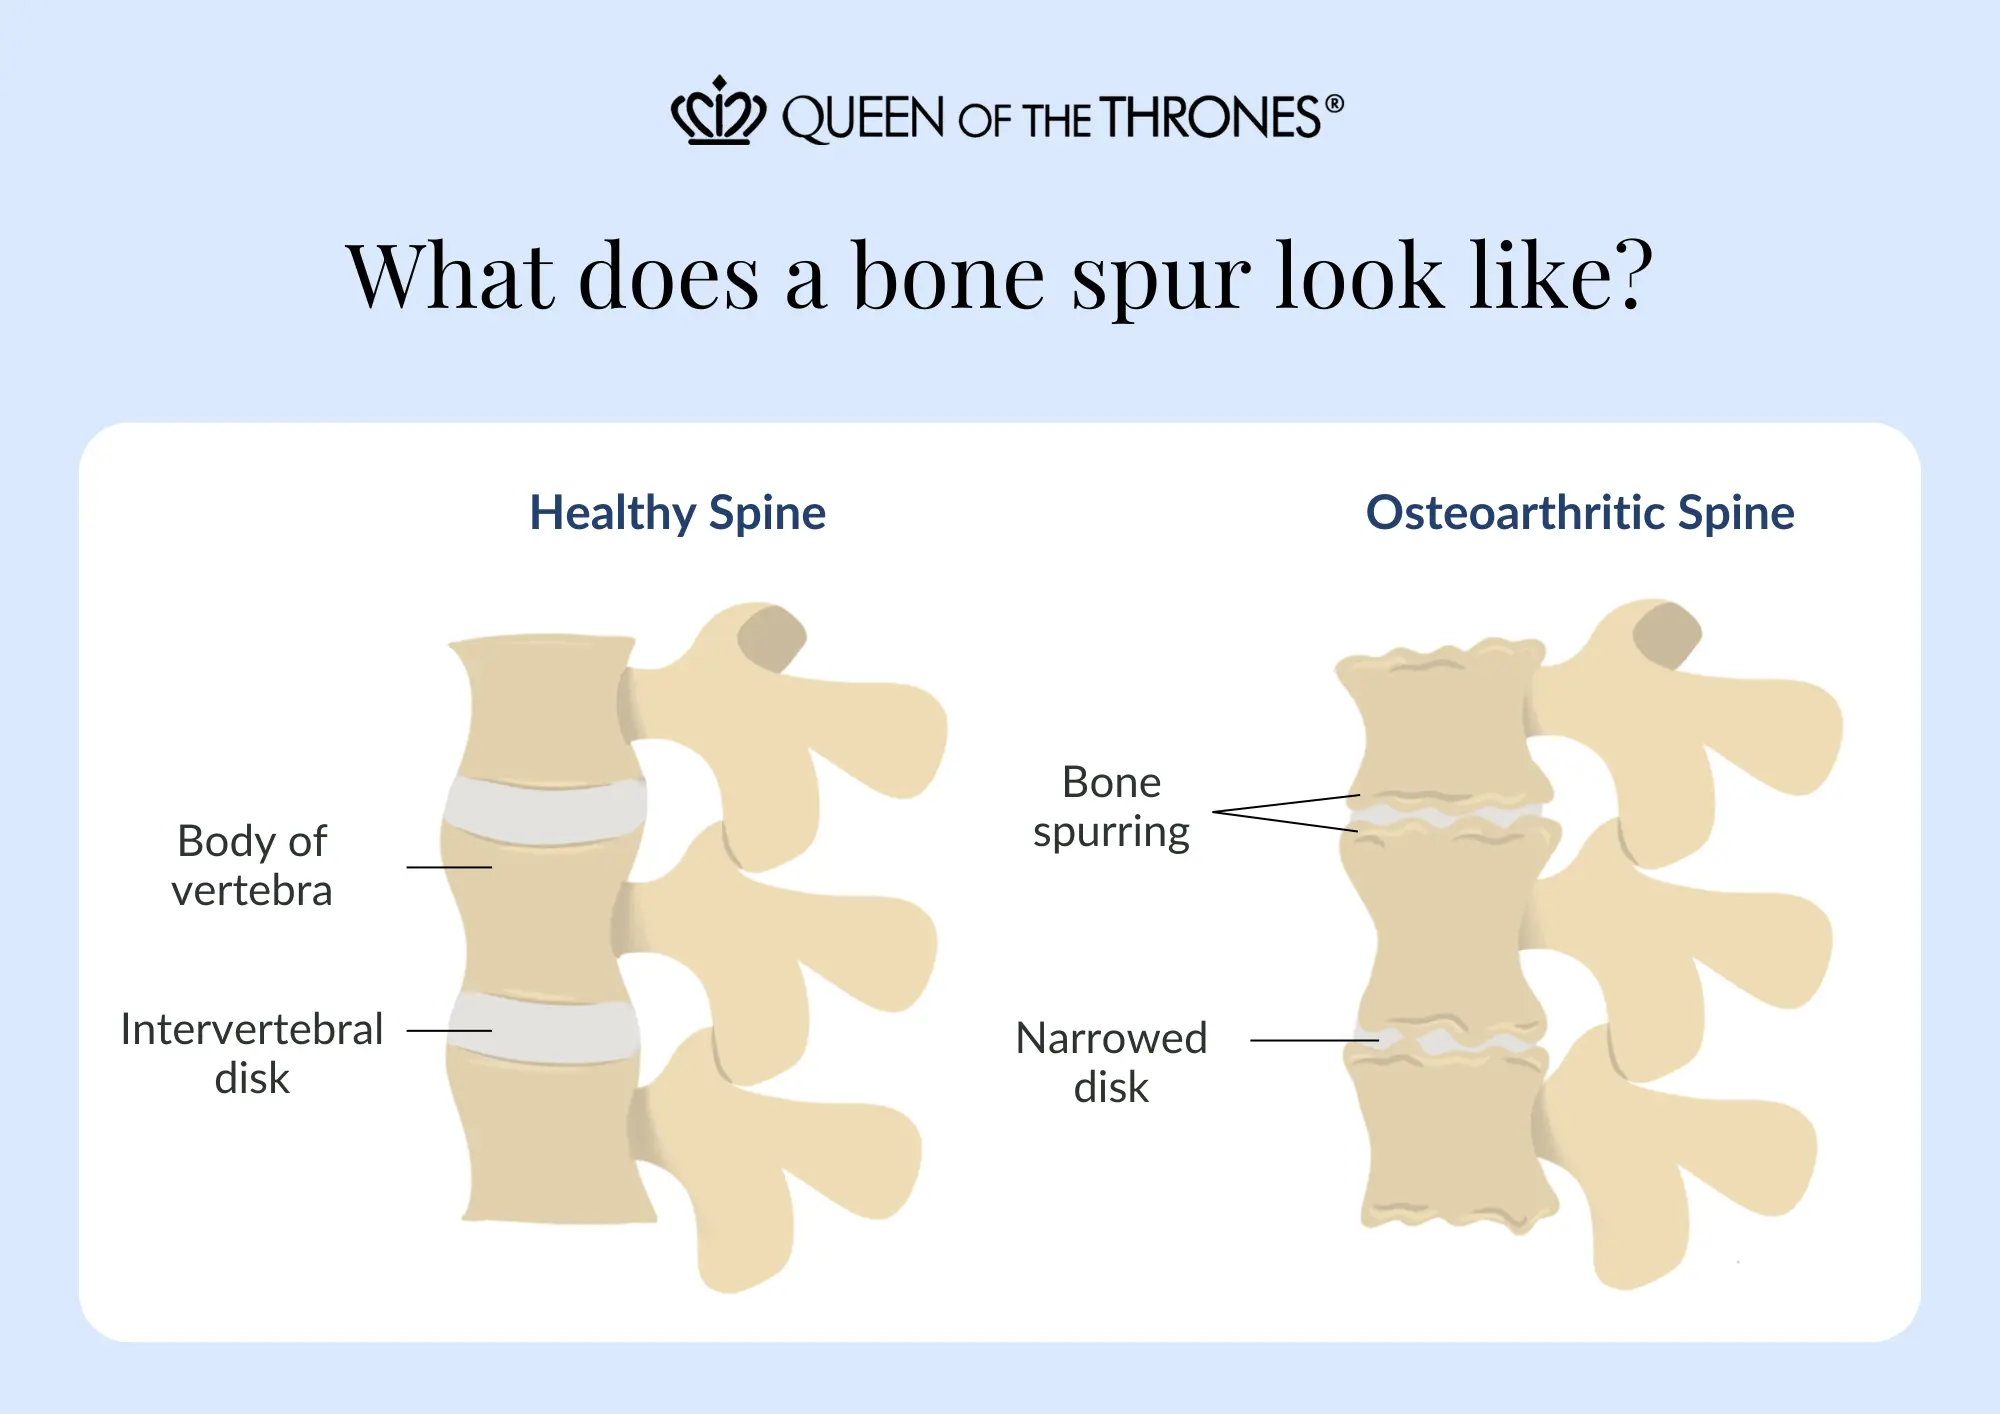 What does a bone spur look like by<br />
Queen of the Thrones